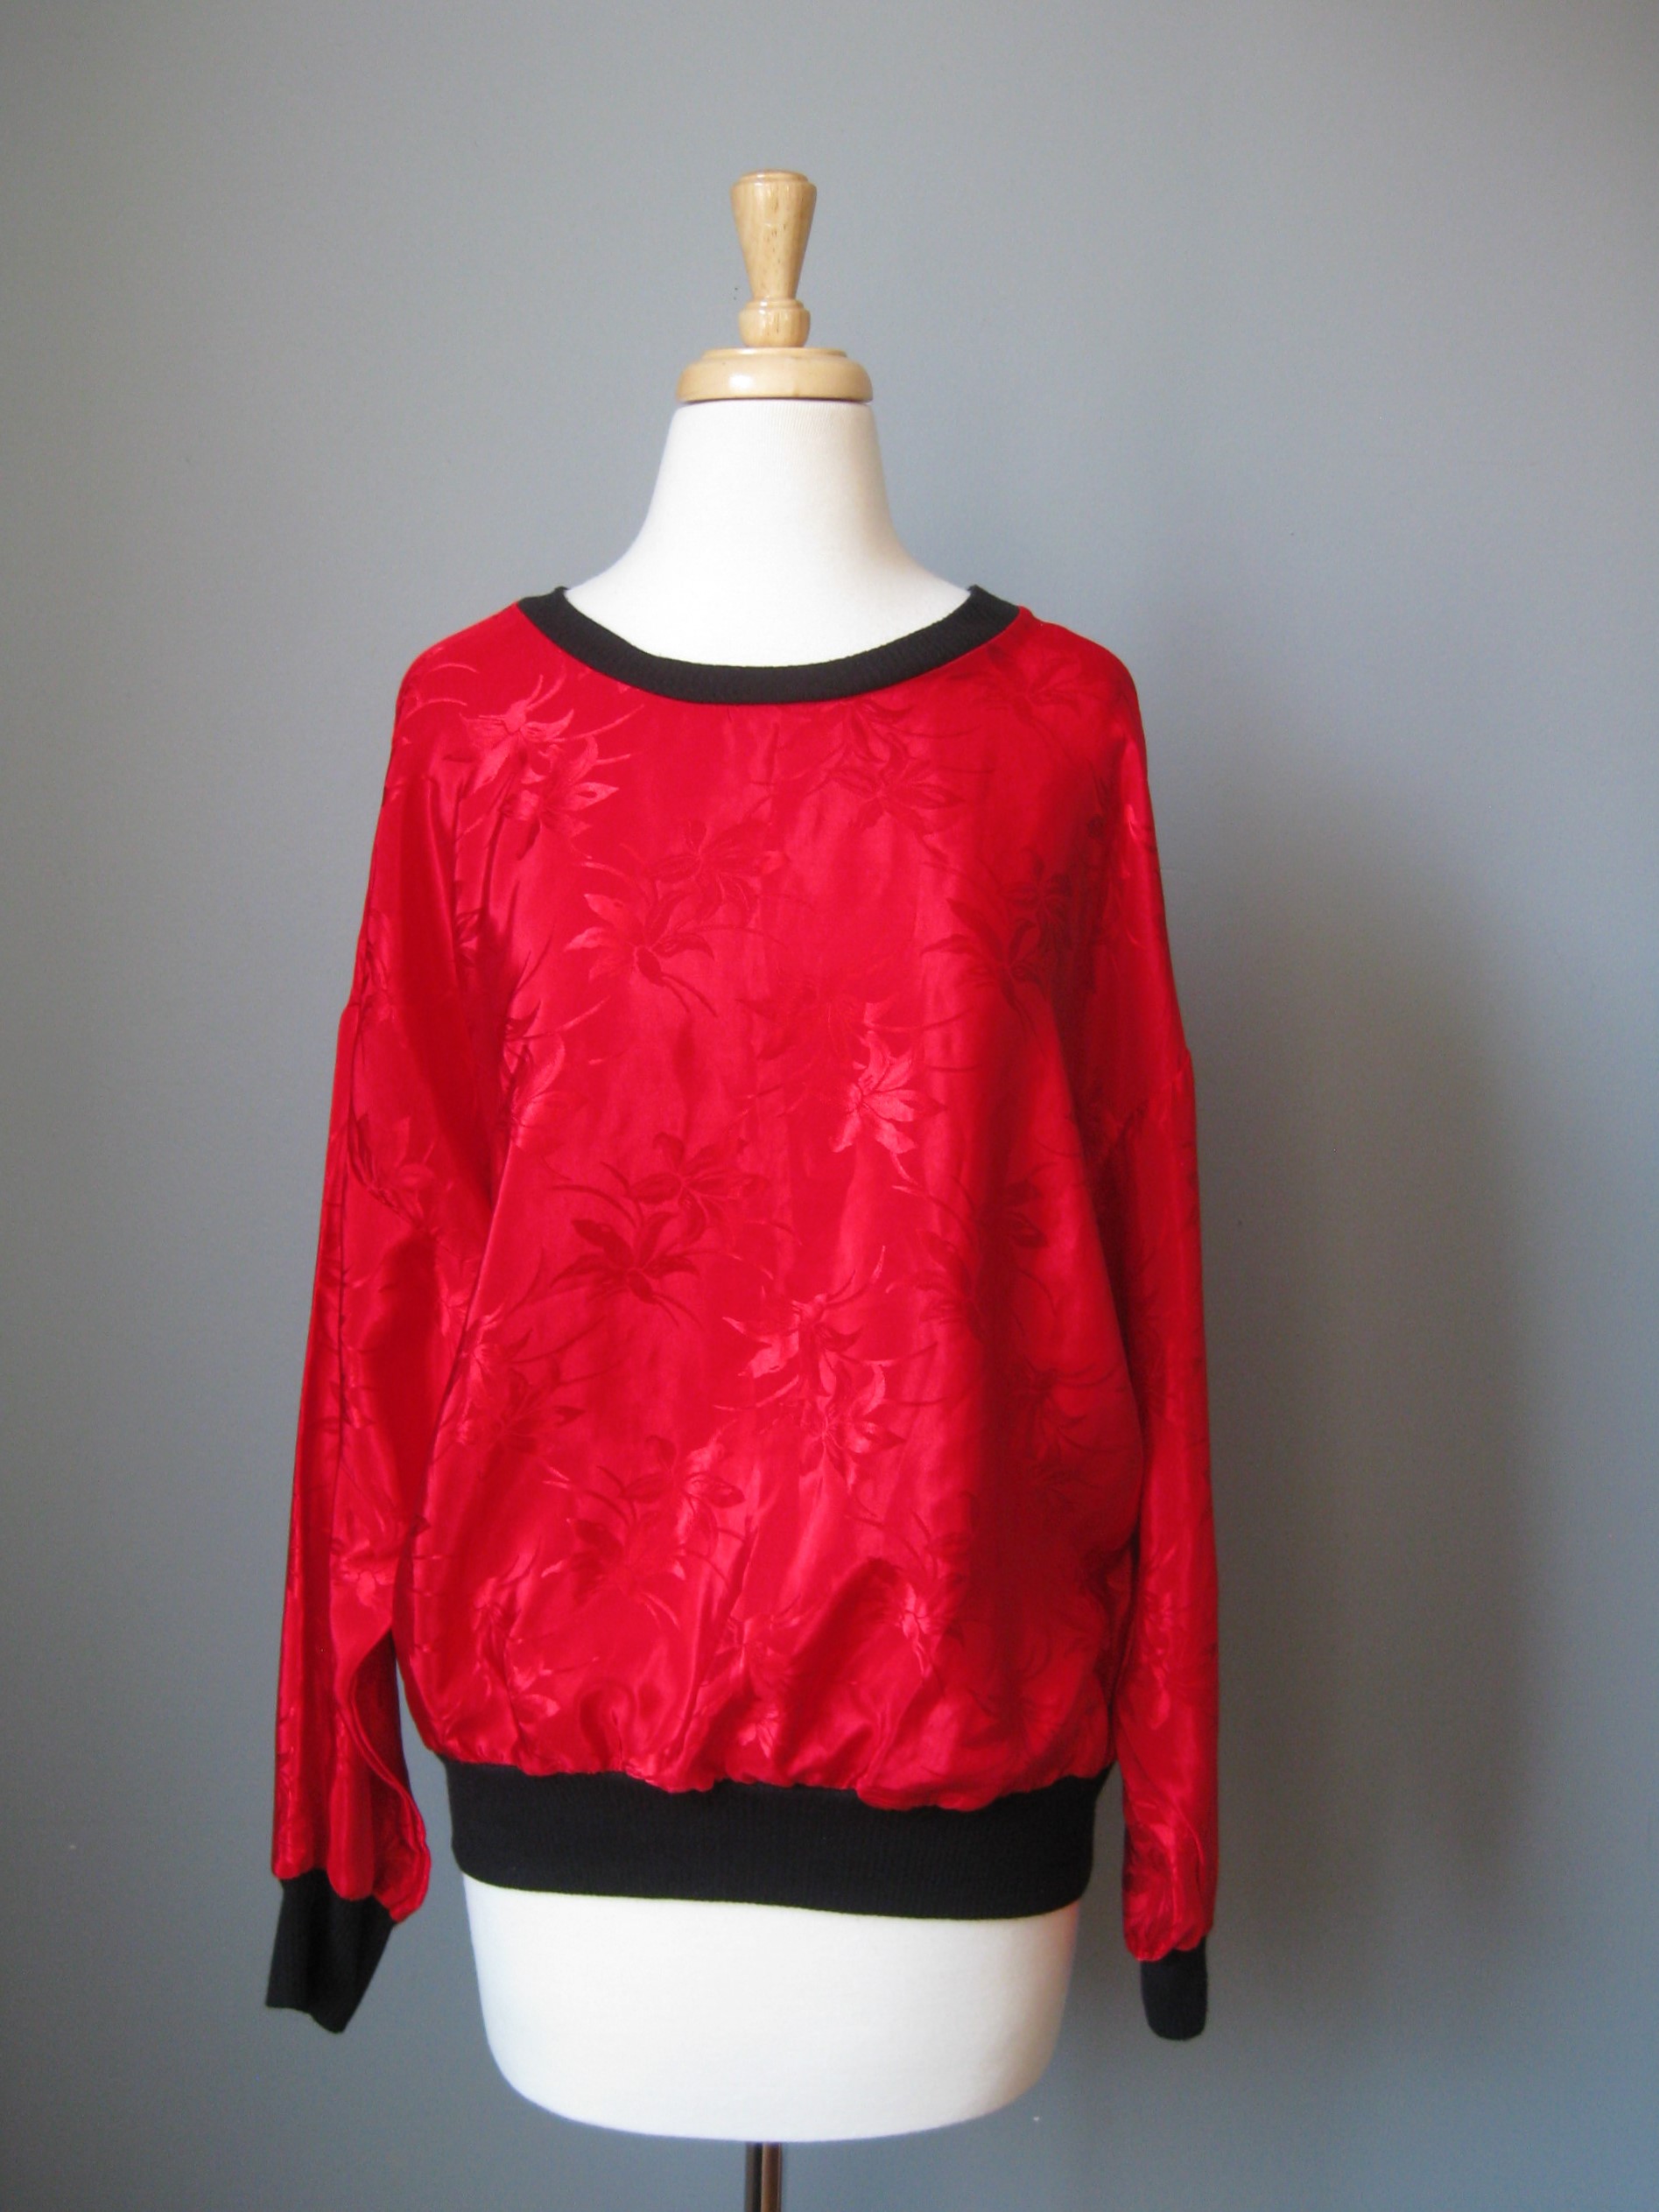 Bright red shirt from the 1980s in satin jacquard

Black contrast trim at neck and sleeve ends

Made in the USA by the brand Claudia
Marked size large
flat measurements:
armpit to armpit: 24in
length: 24 3/4in

excellent condition, no flaws

thanks for looking!